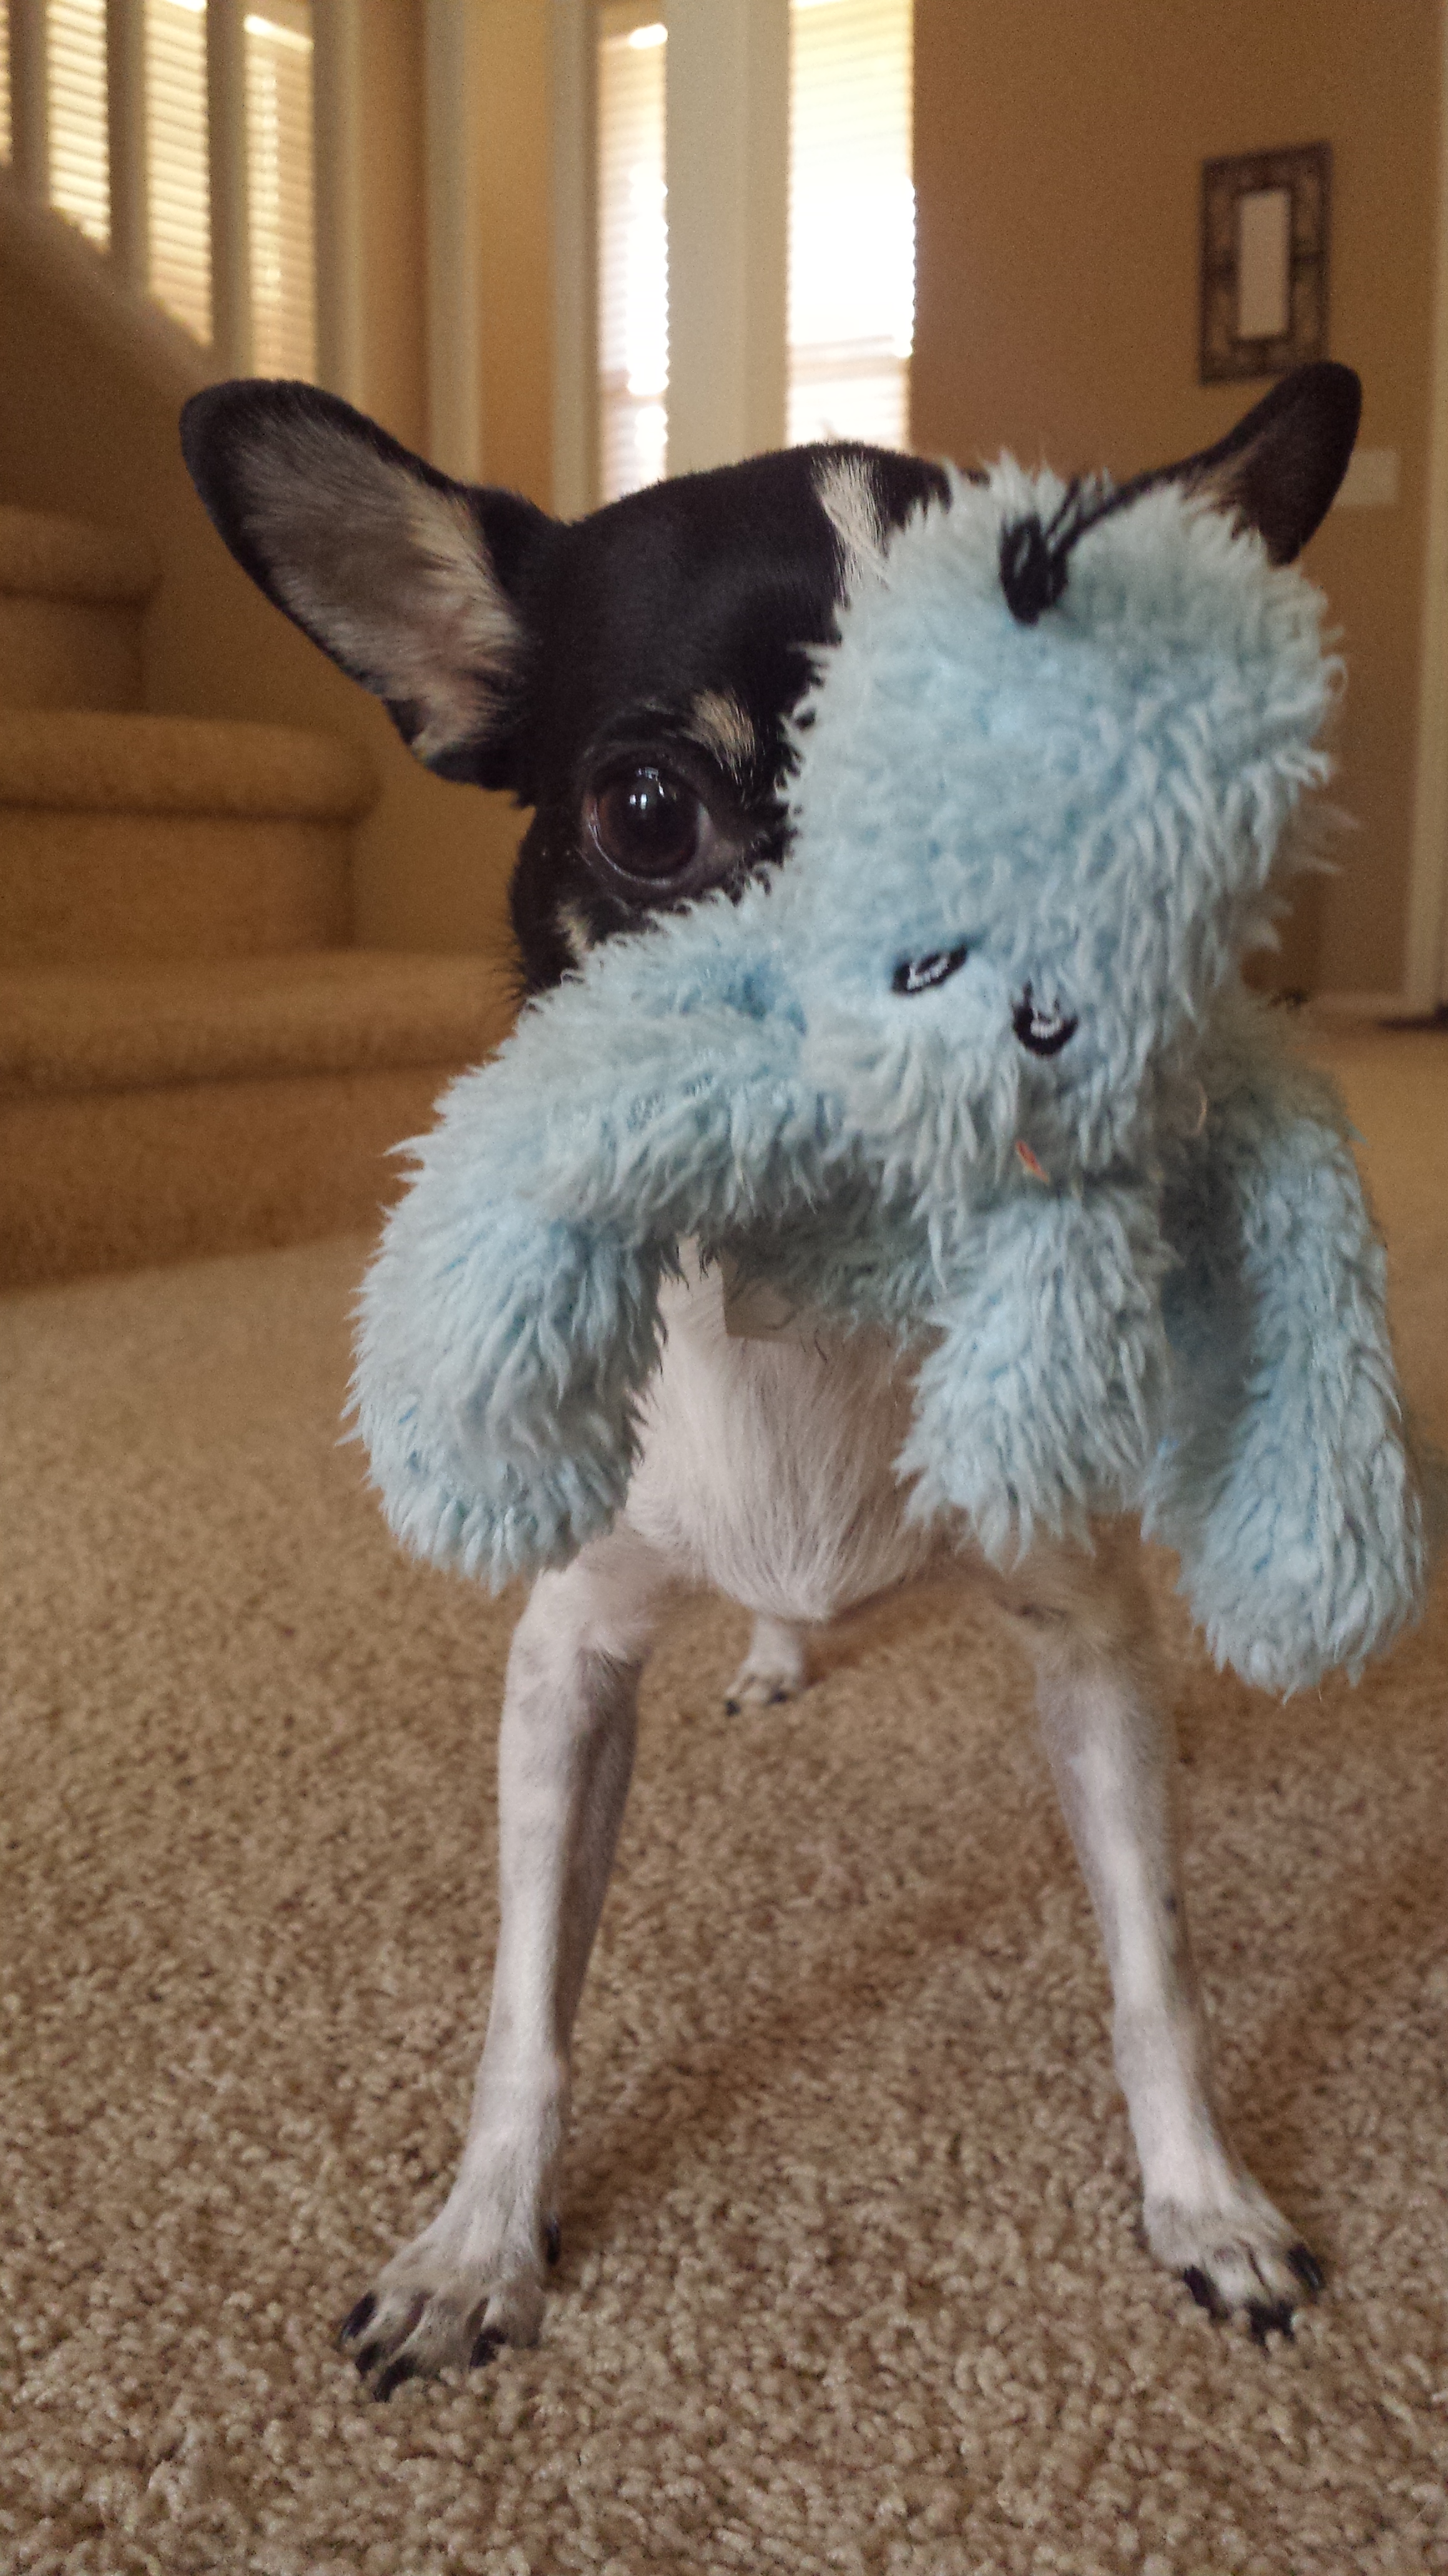 Time to play with blue dog!